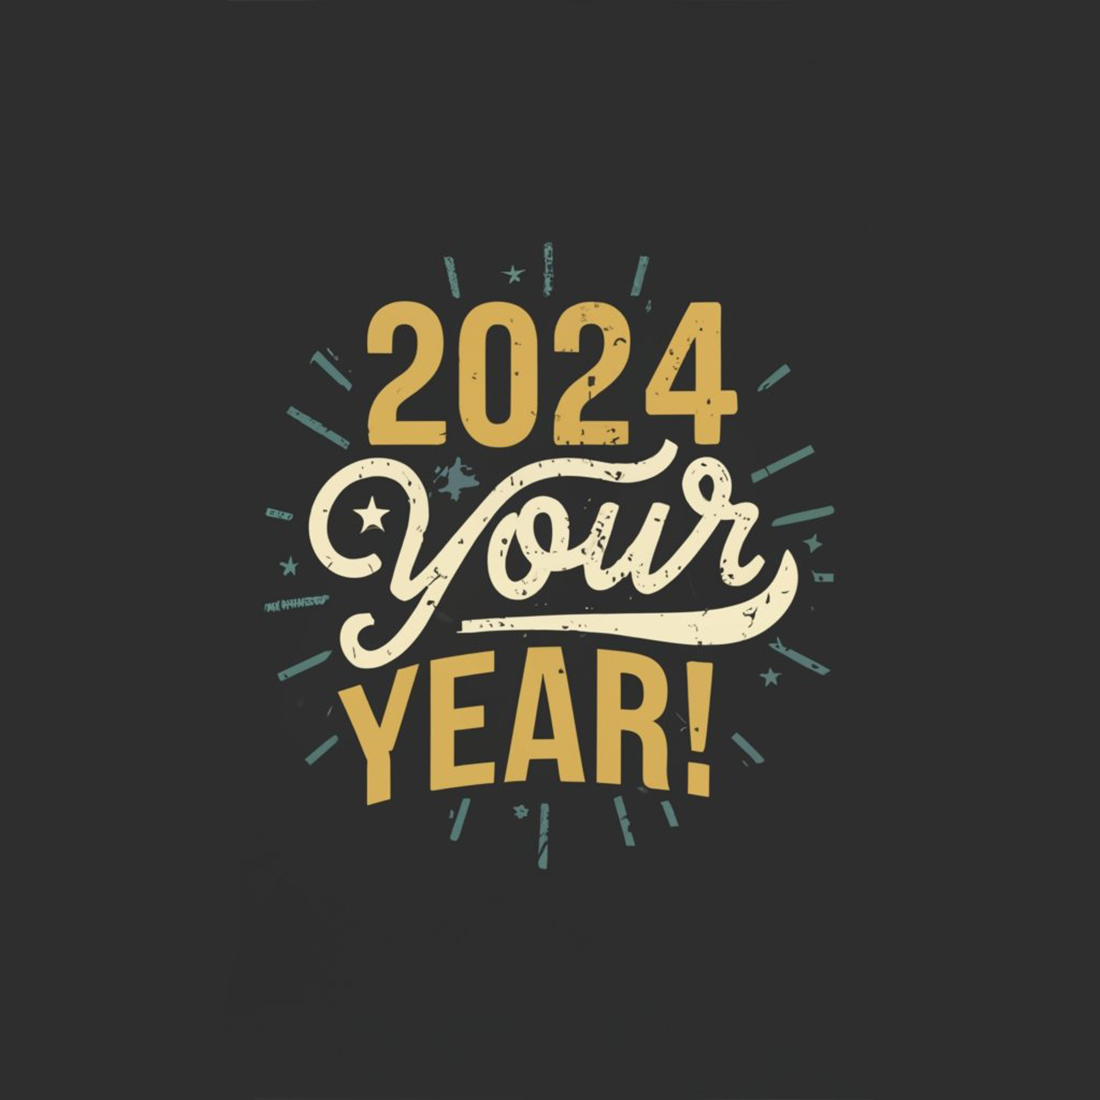 Happy New Year 2024 T-shirt Design cover image.